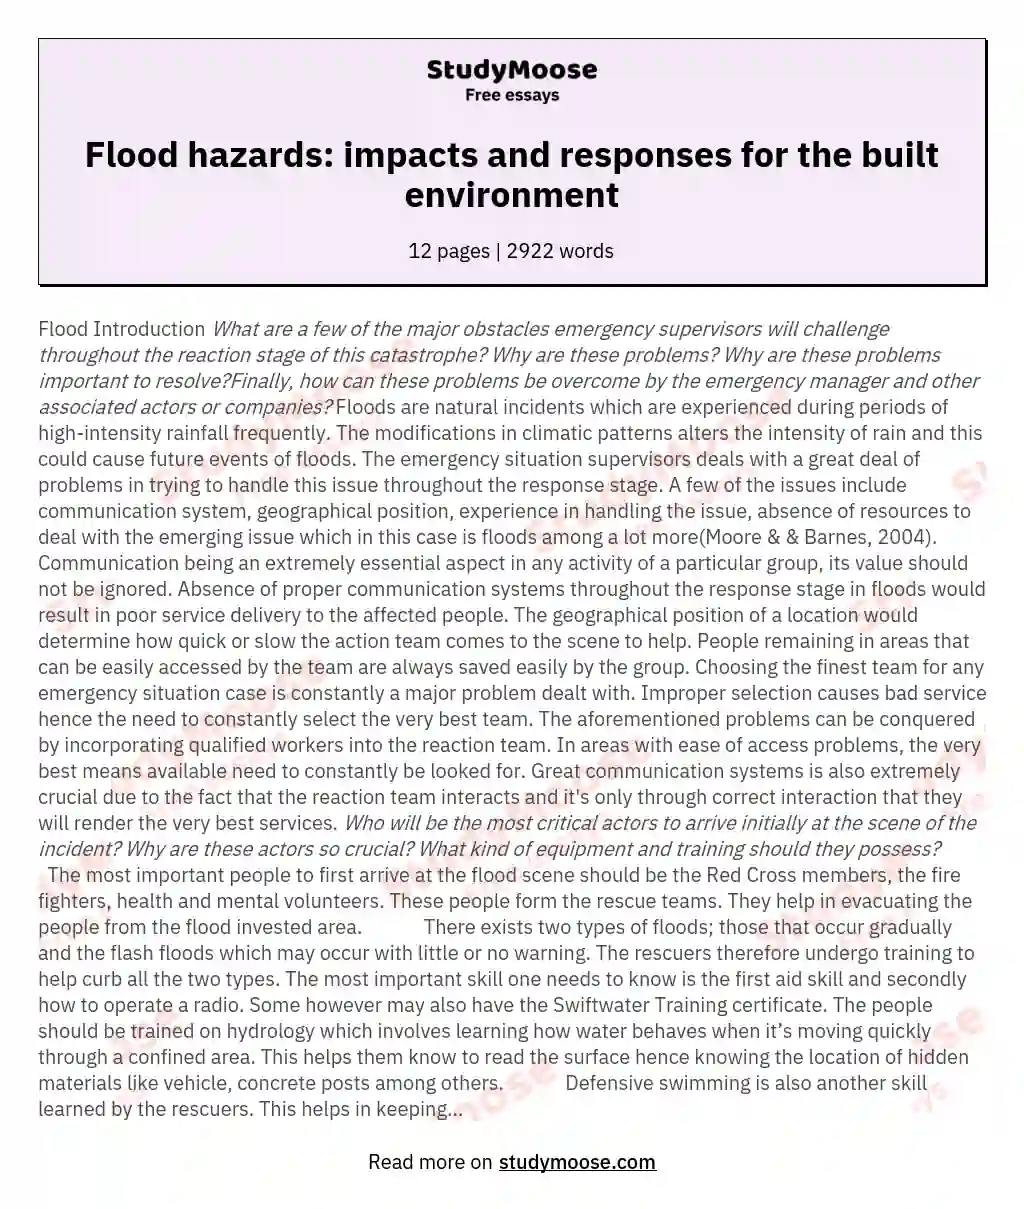 Flood hazards: impacts and responses for the built environment